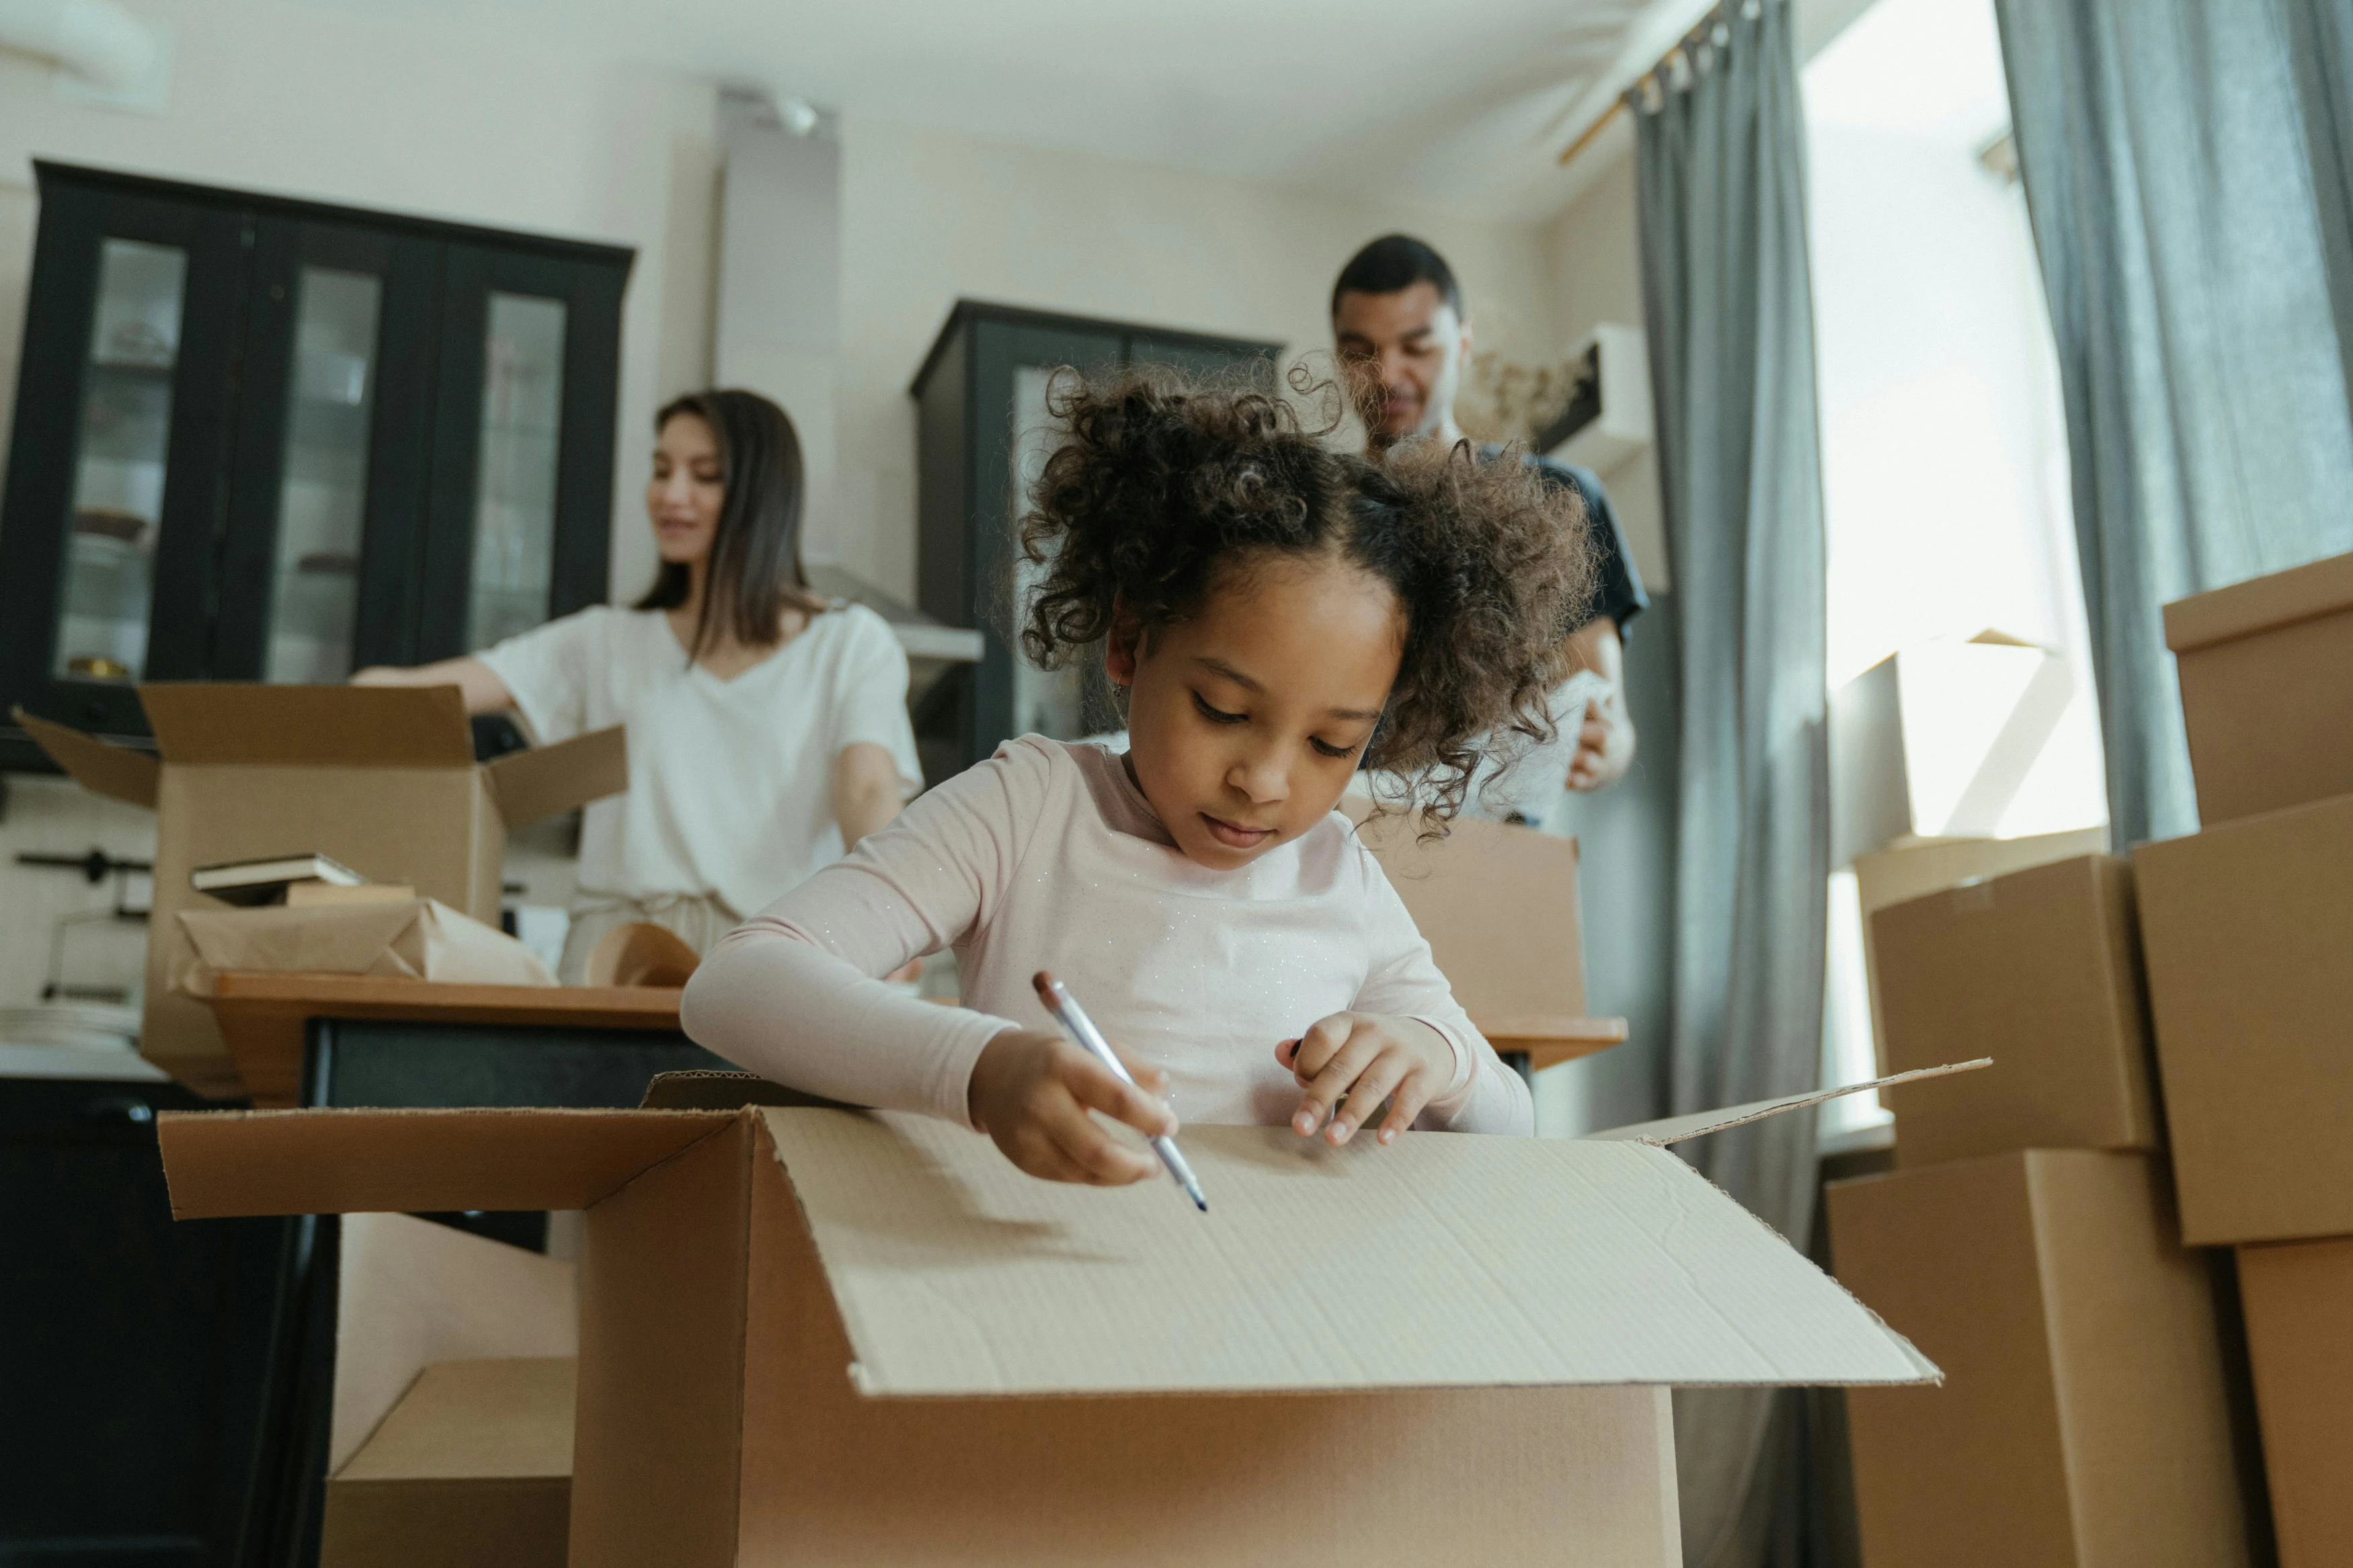 family with child moving into new home unpacking and drawing on boxes